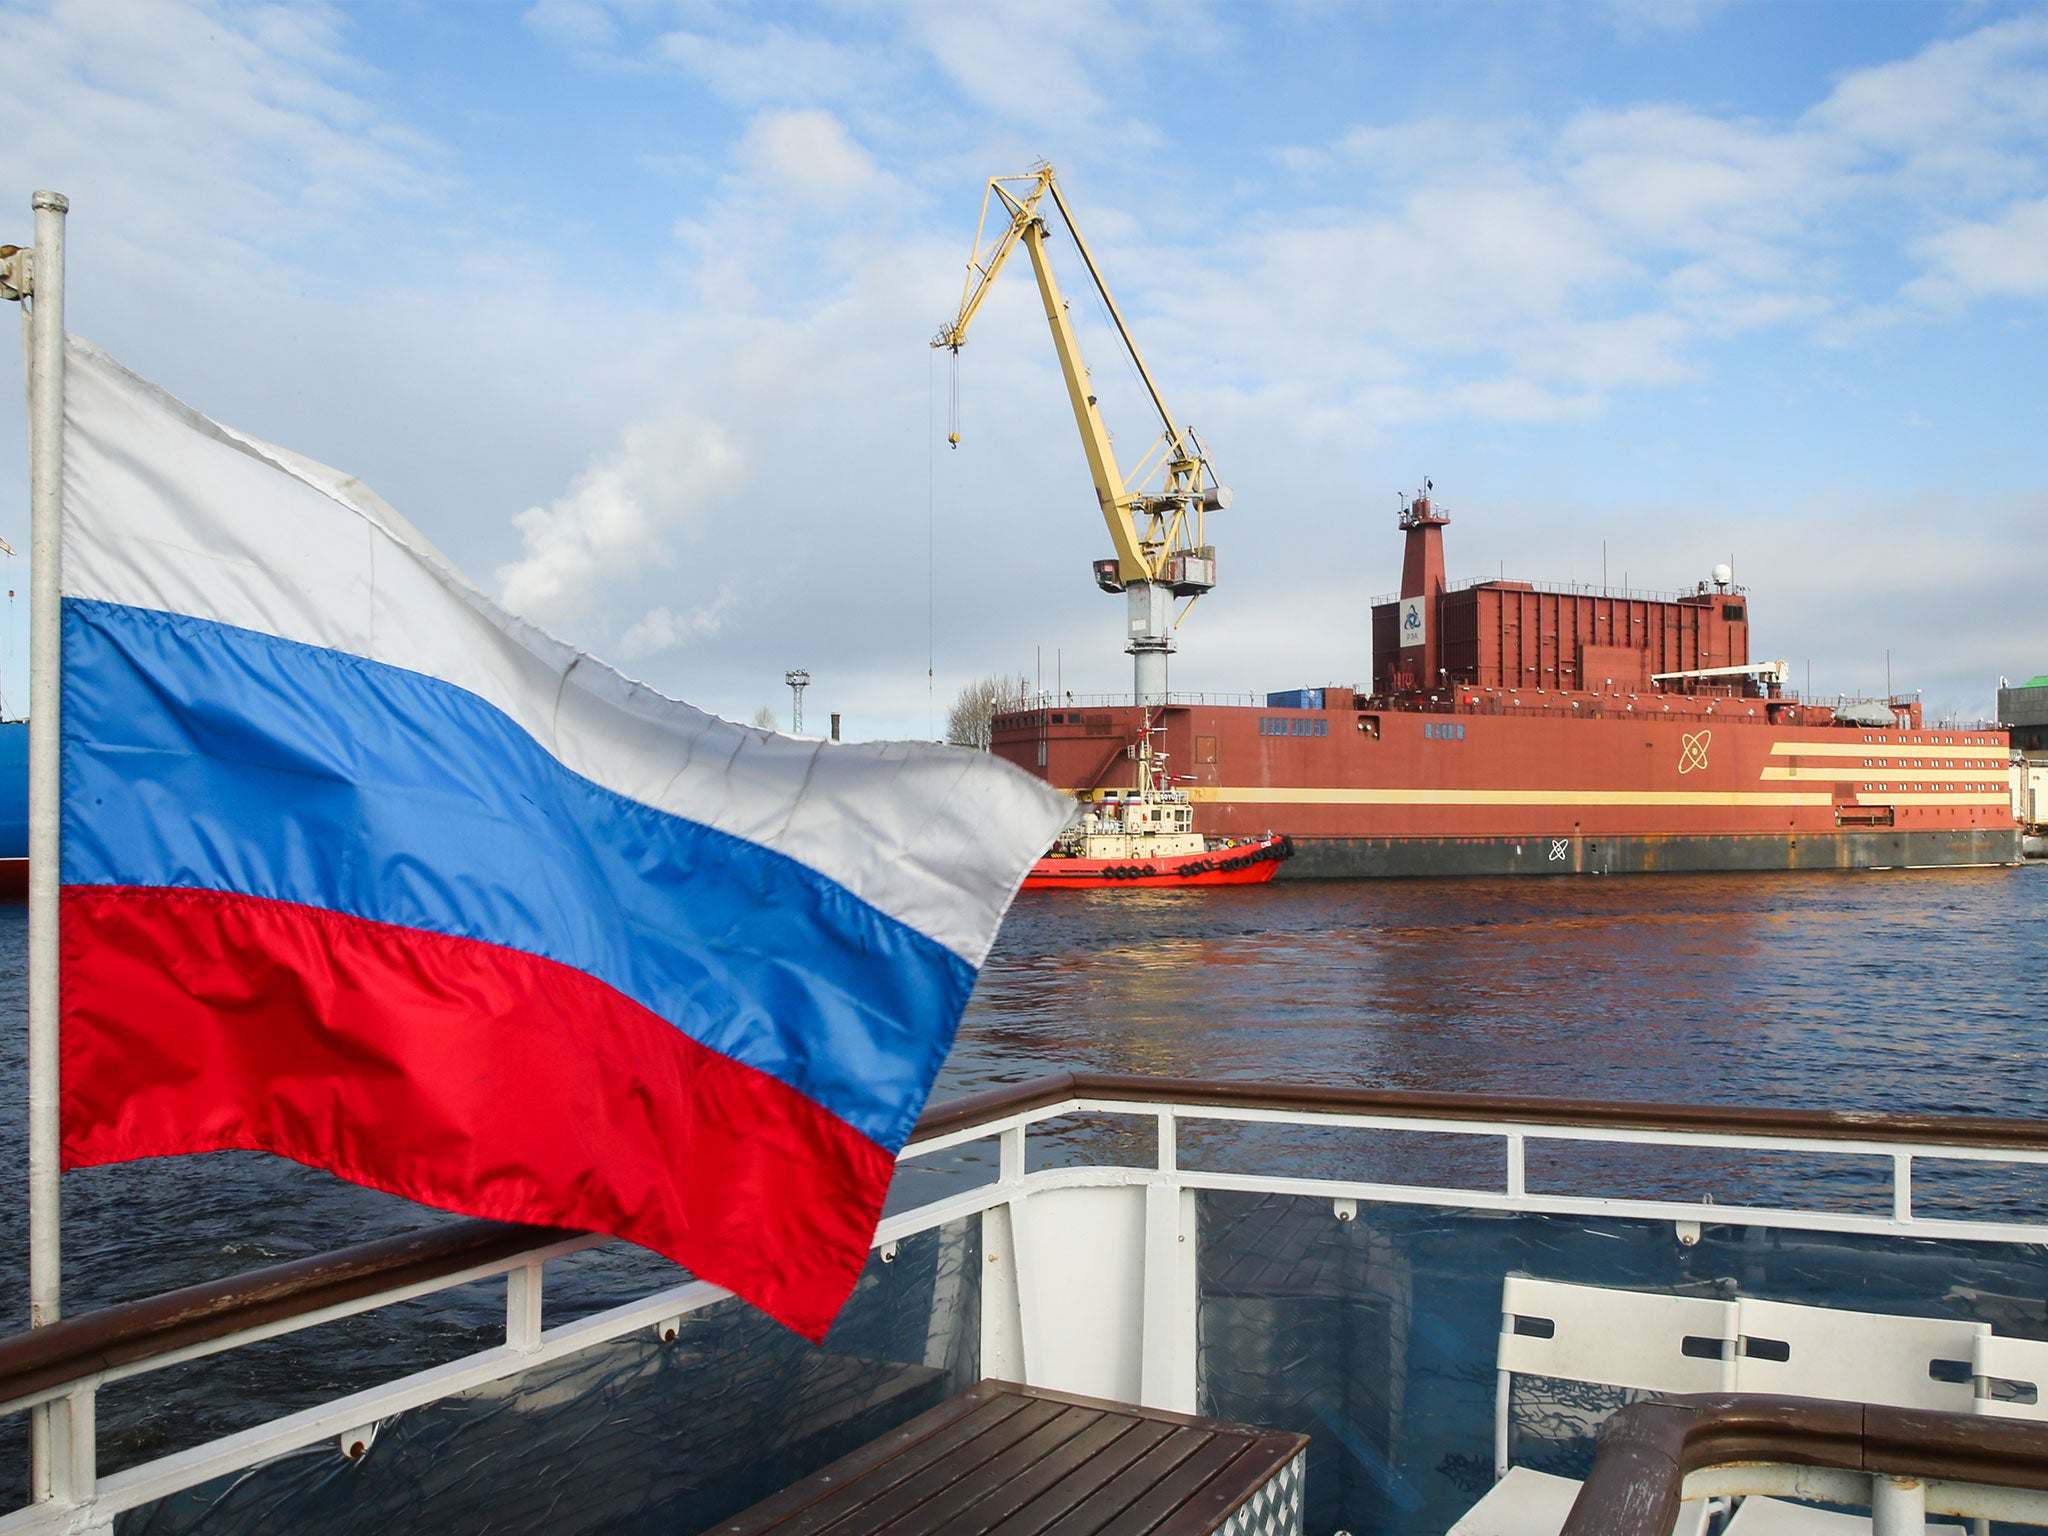 Russia expects to begin construction on a second floating plant in 2019